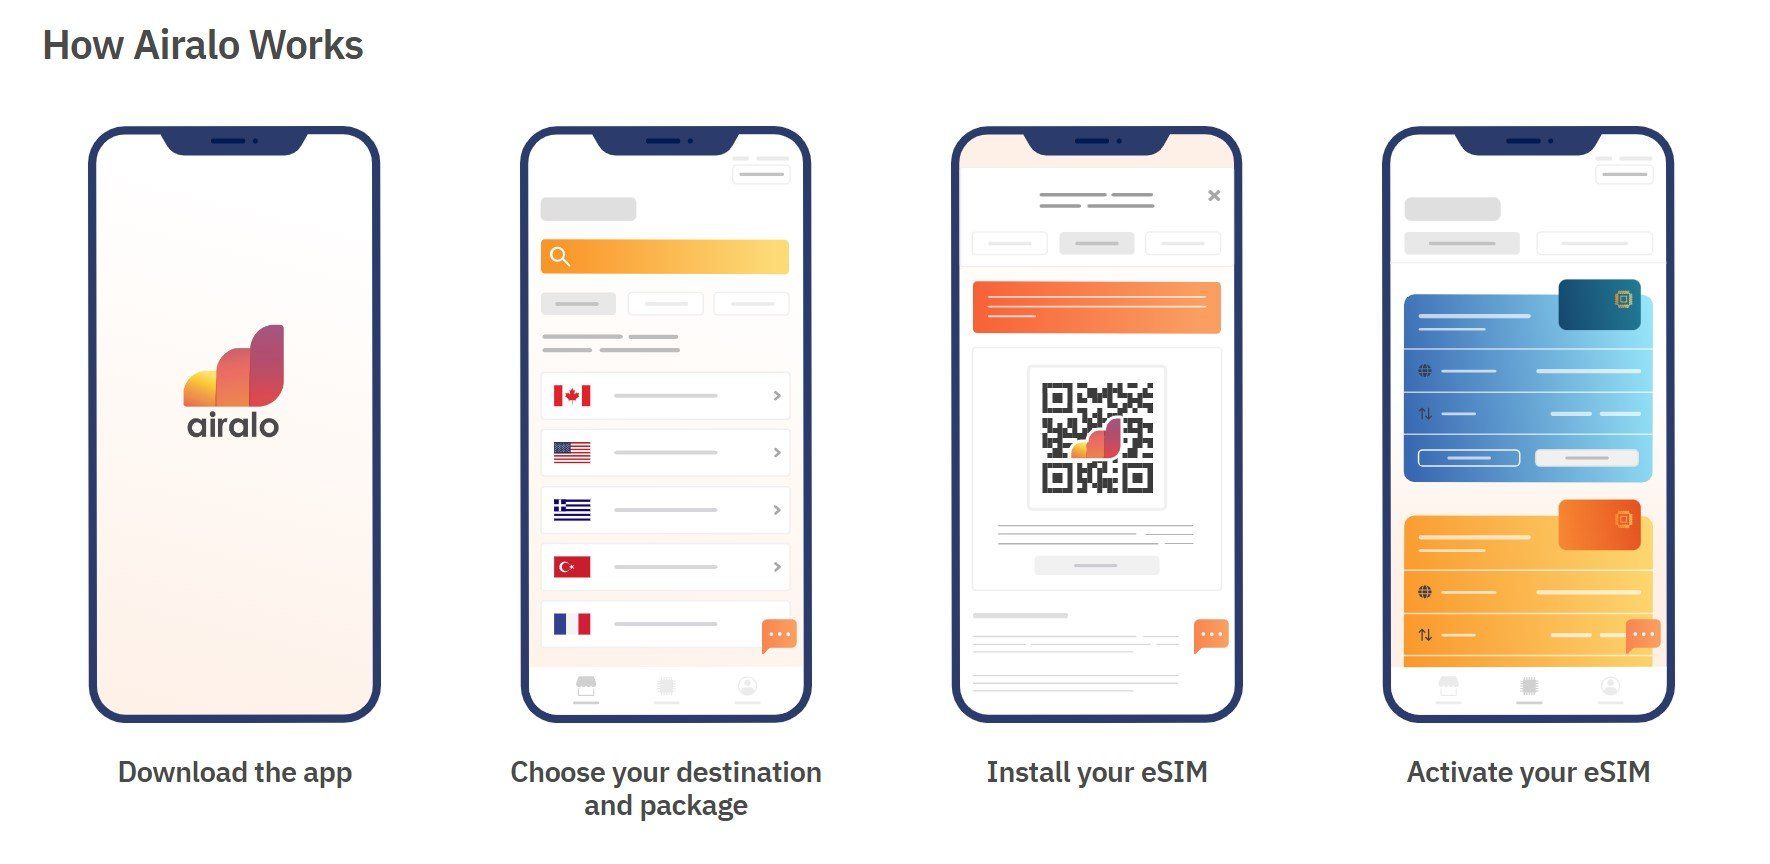 Airalo installation instructions: 1. Download the app, 2. Choose your destination and package, 3. Install your eSIM, 4. Activate your eSIM